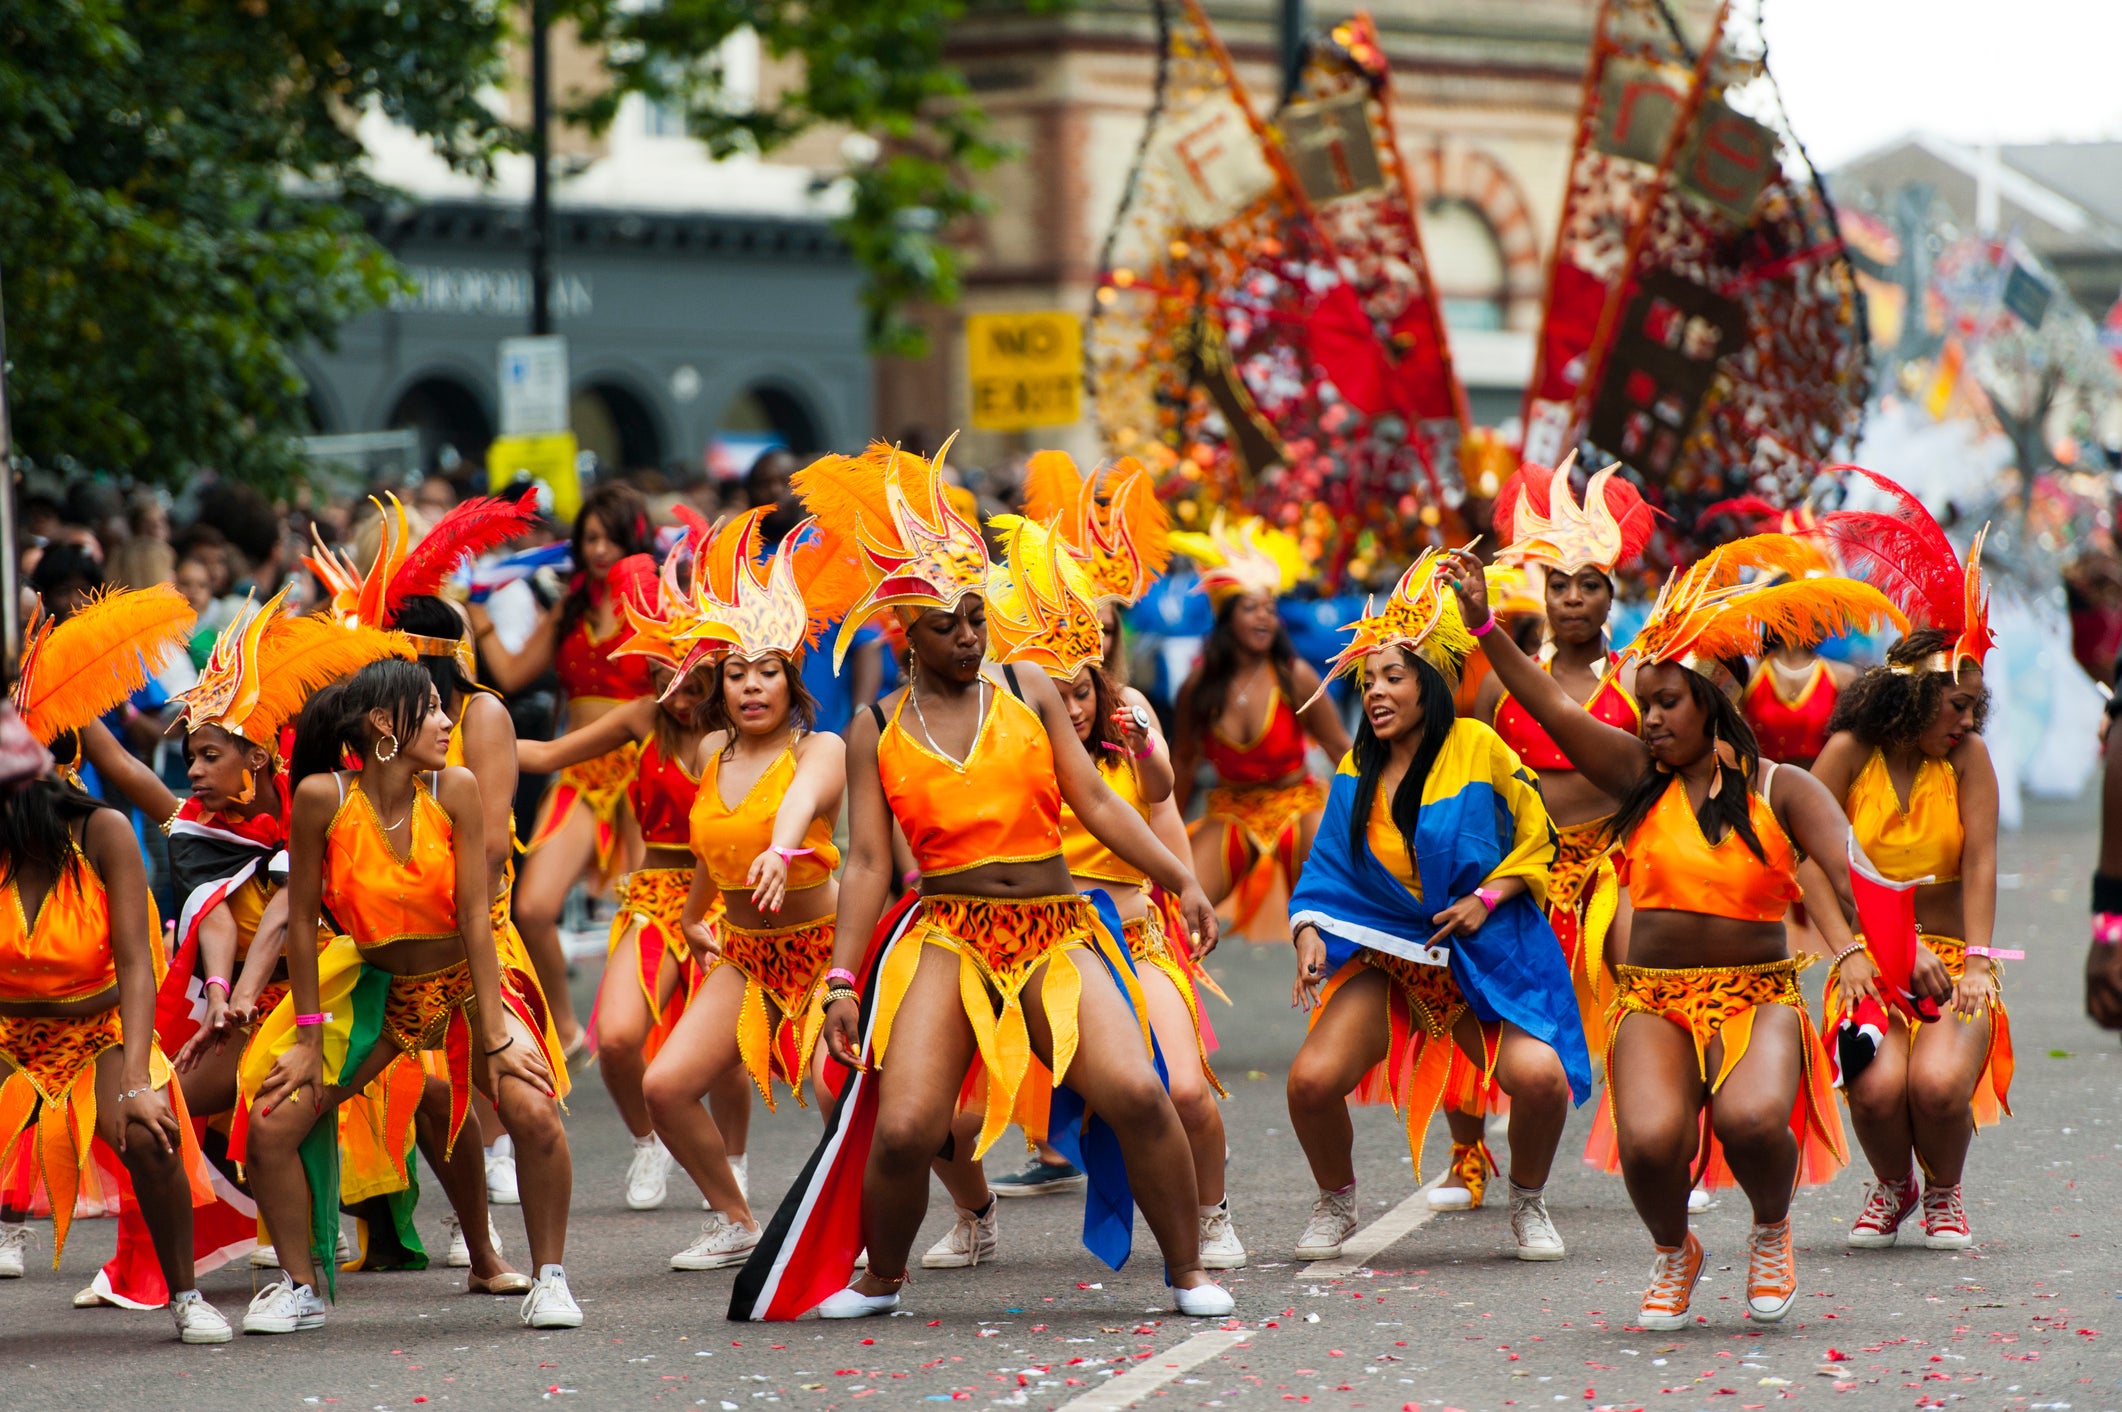 Samba and strut with the parade dancers in W11